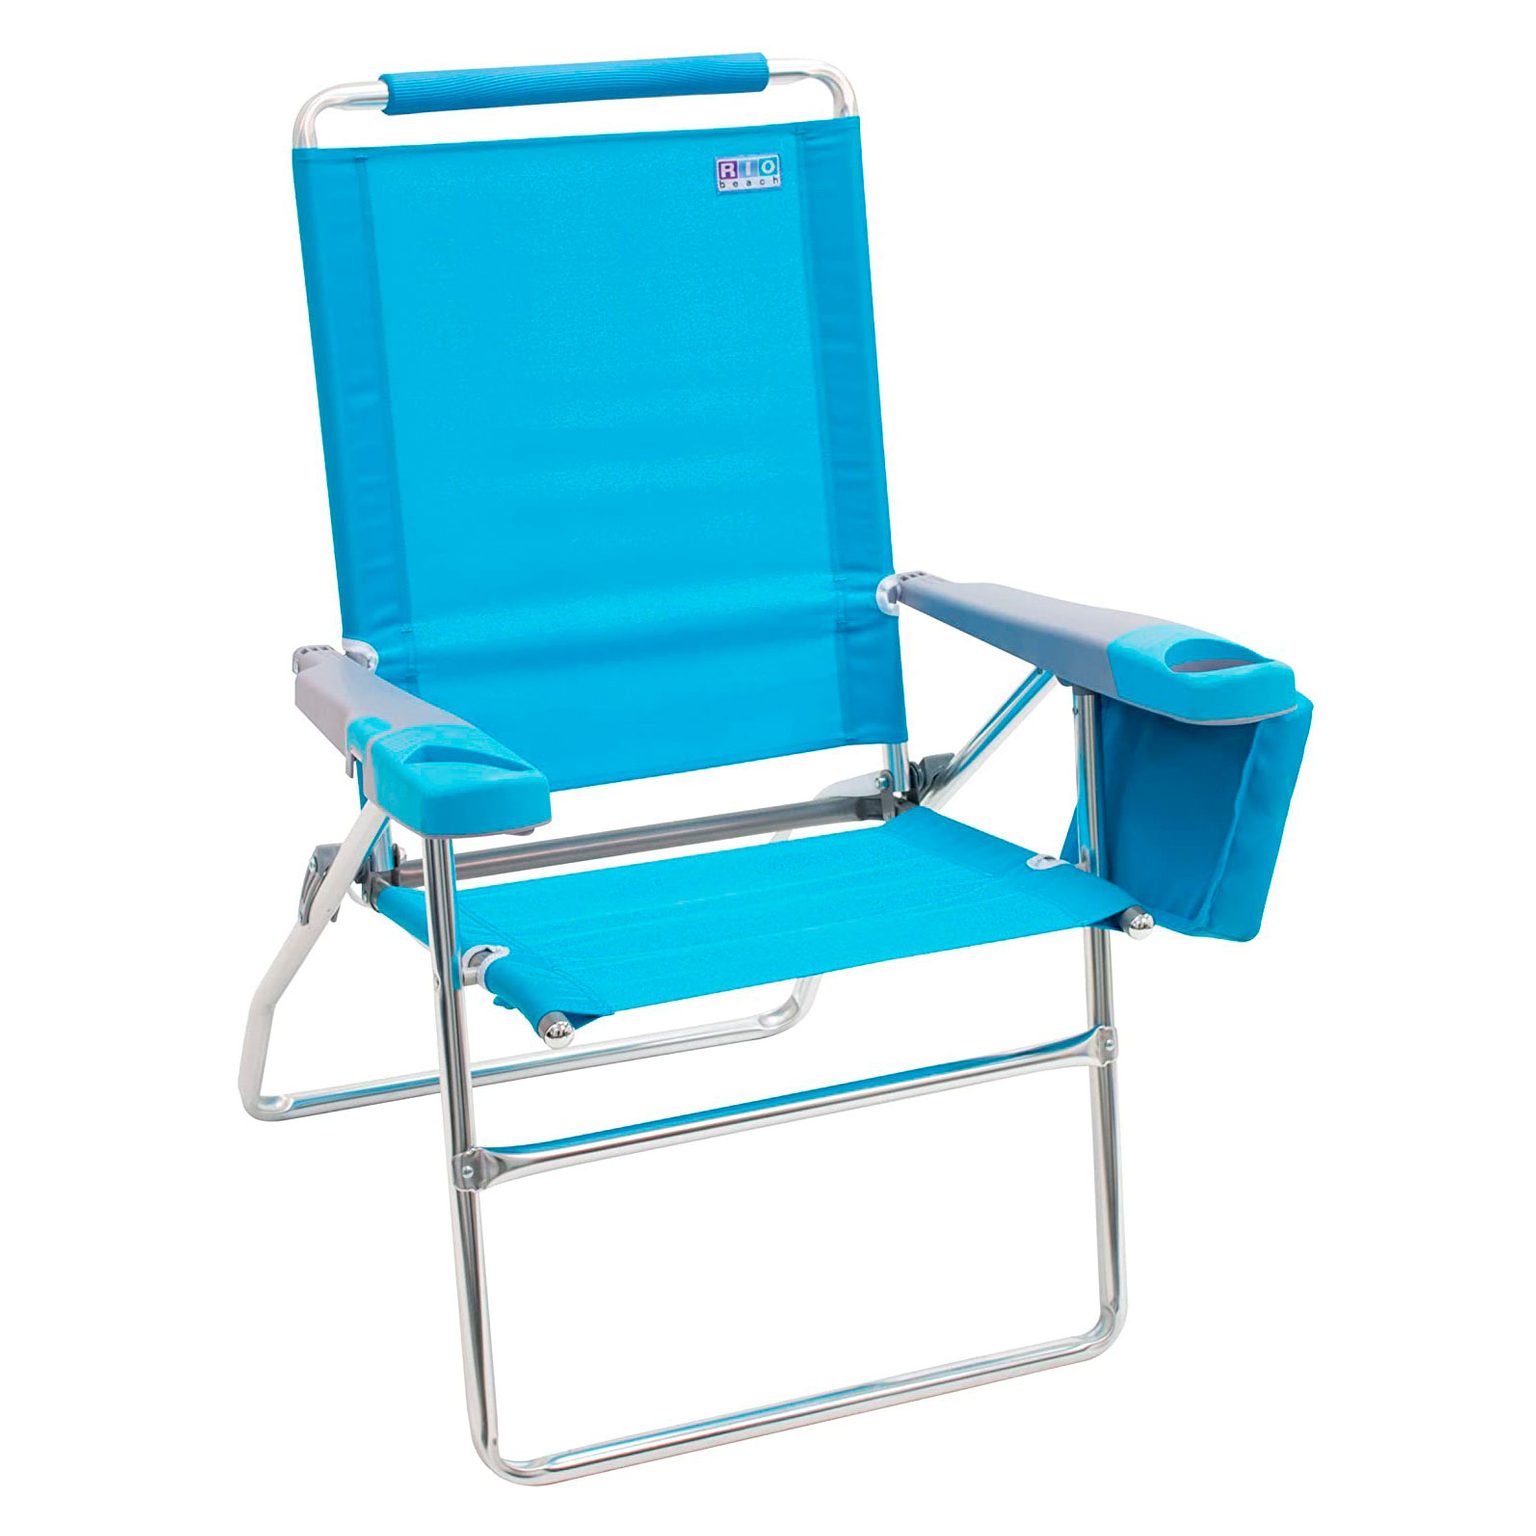  Beach Chair Carrier for Large Space